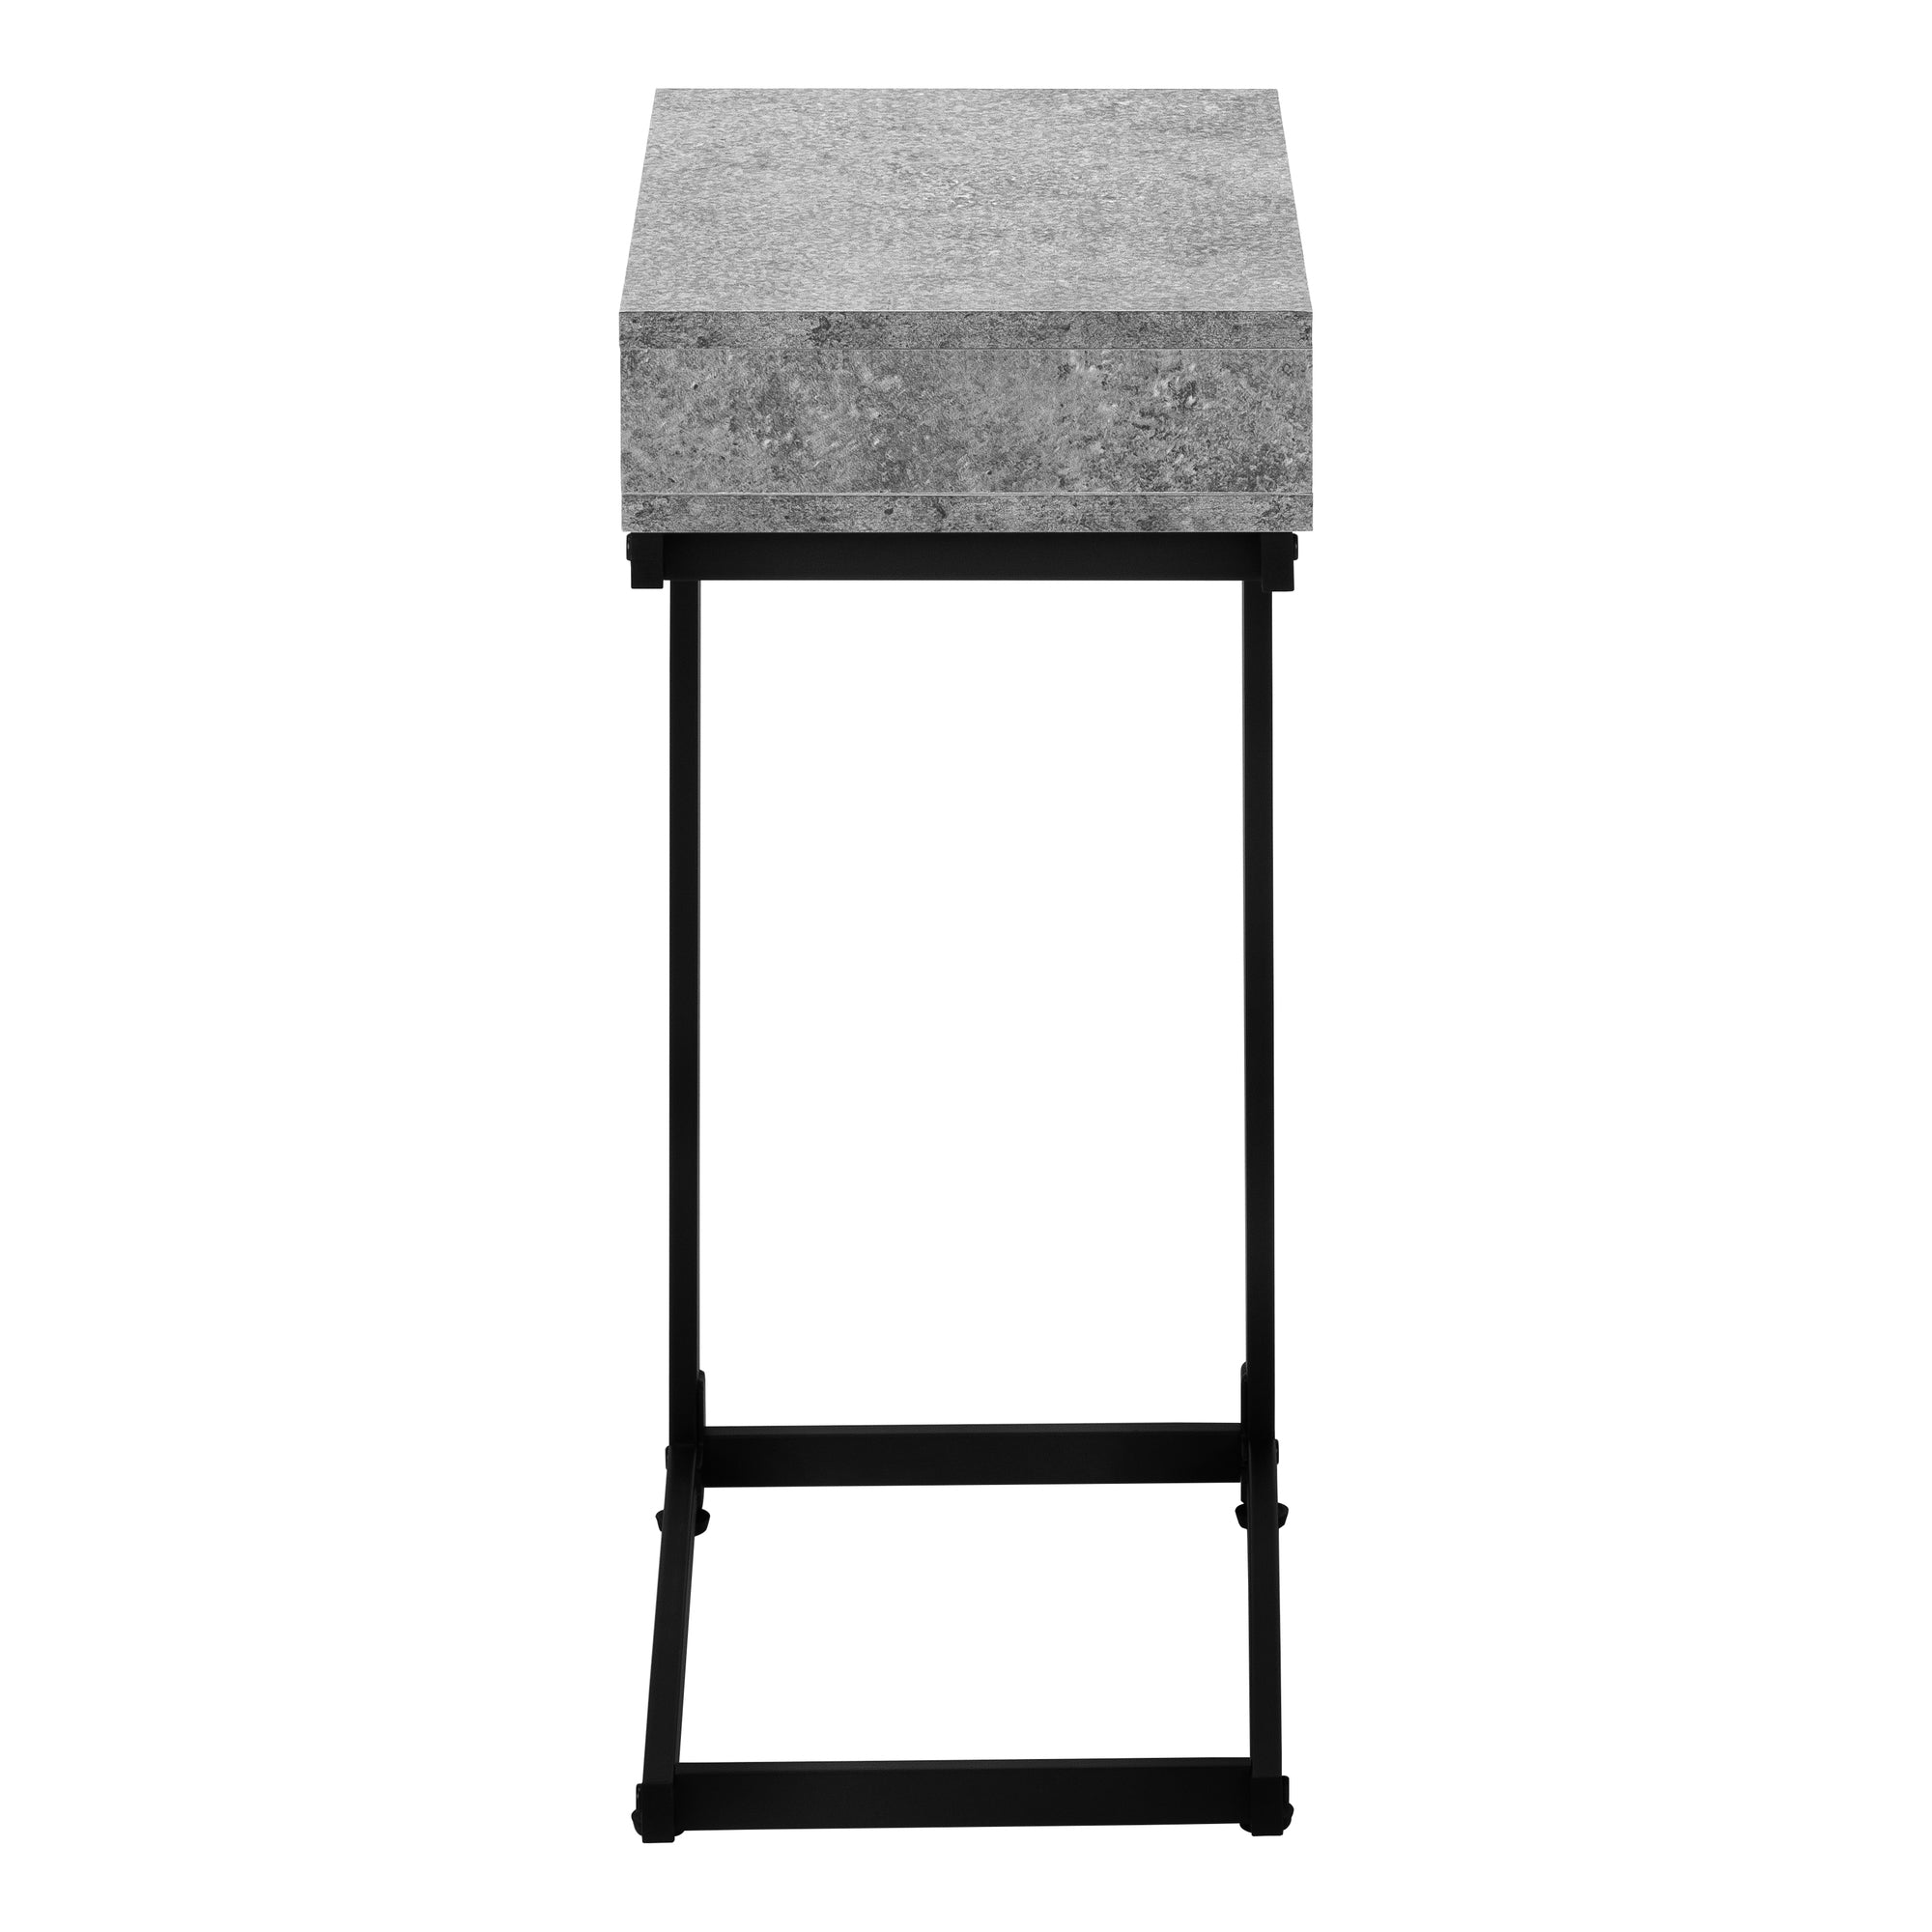 MN-613603    Accent Table, C-Shaped, End, Side, Snack, Living Room, Bedroom, Storage Drawer, Metal Frame, Laminate, Grey Stone Look, Black, Contemporary, Modern